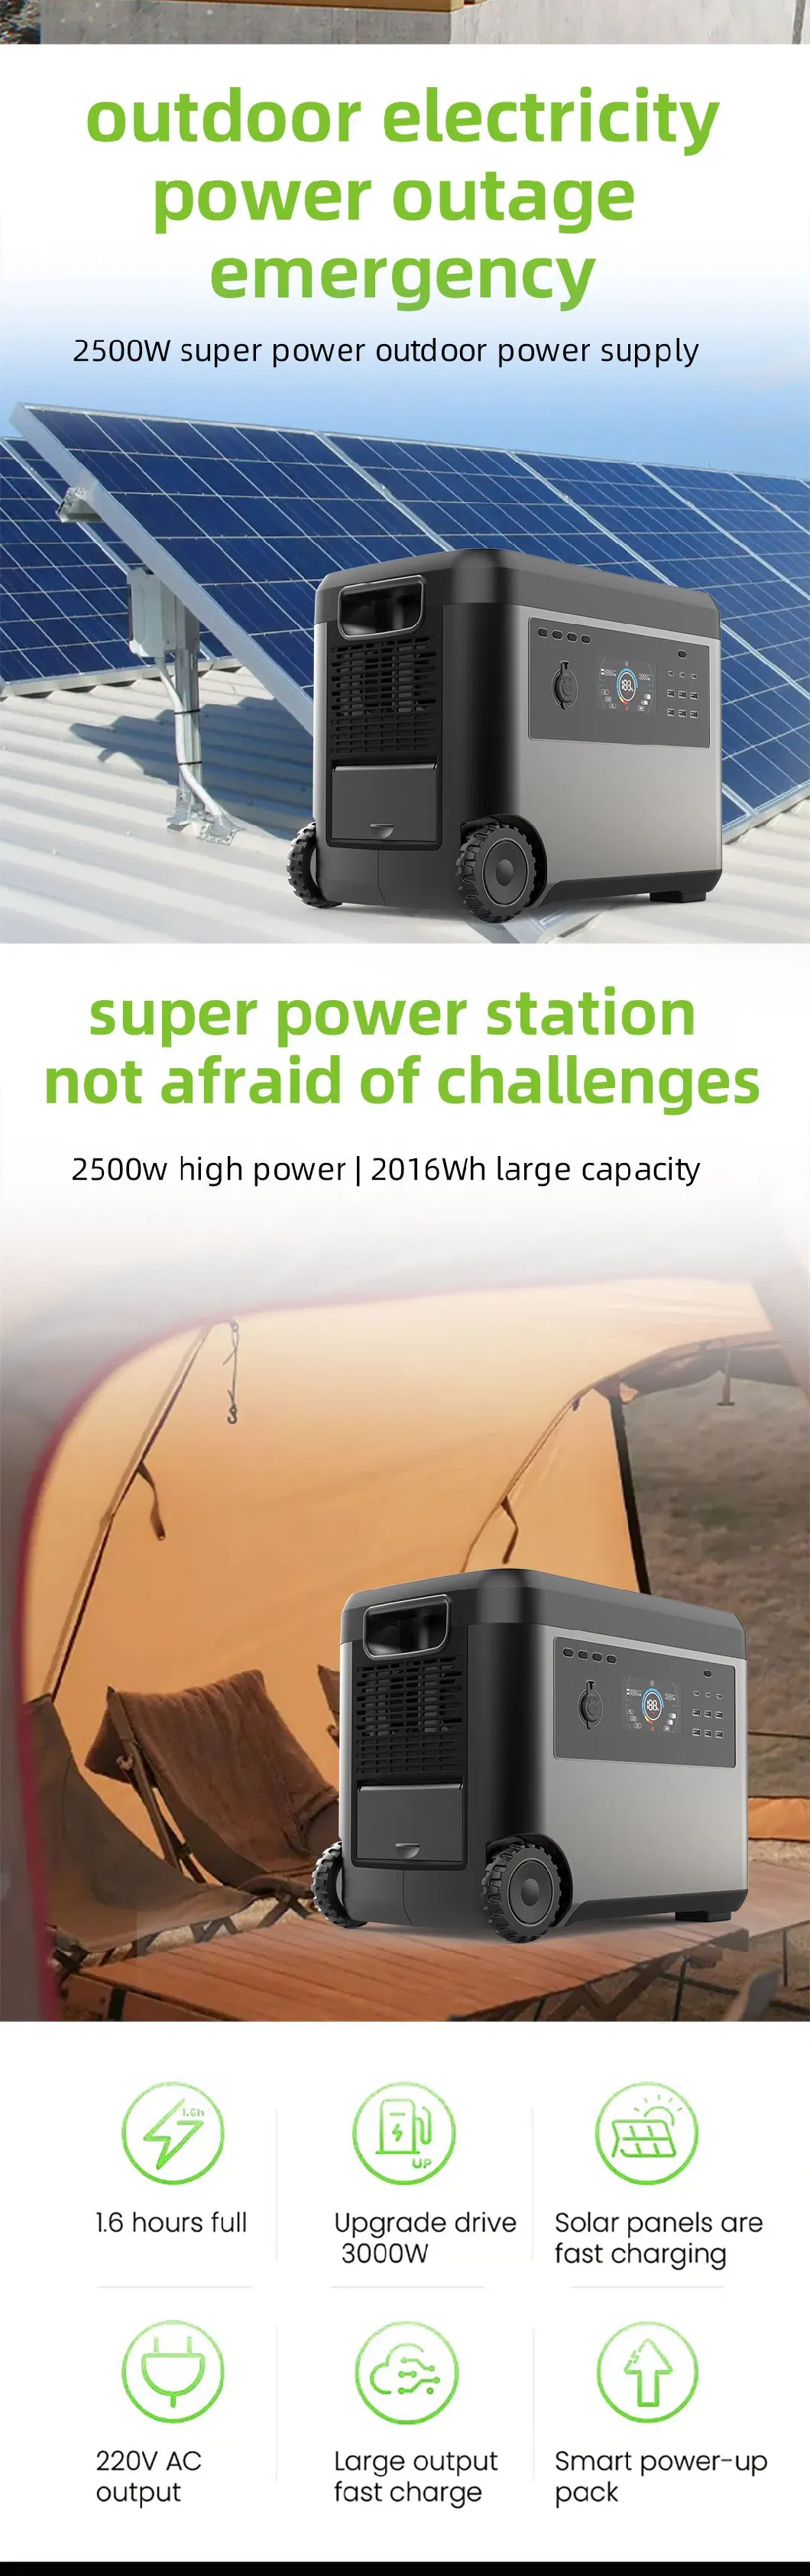 OEM Portable Power Station 500W 1000W 1200W 2000W 2500W Portable Generator 110V 220V LiFePO4 Battery Home Outdoor Camping